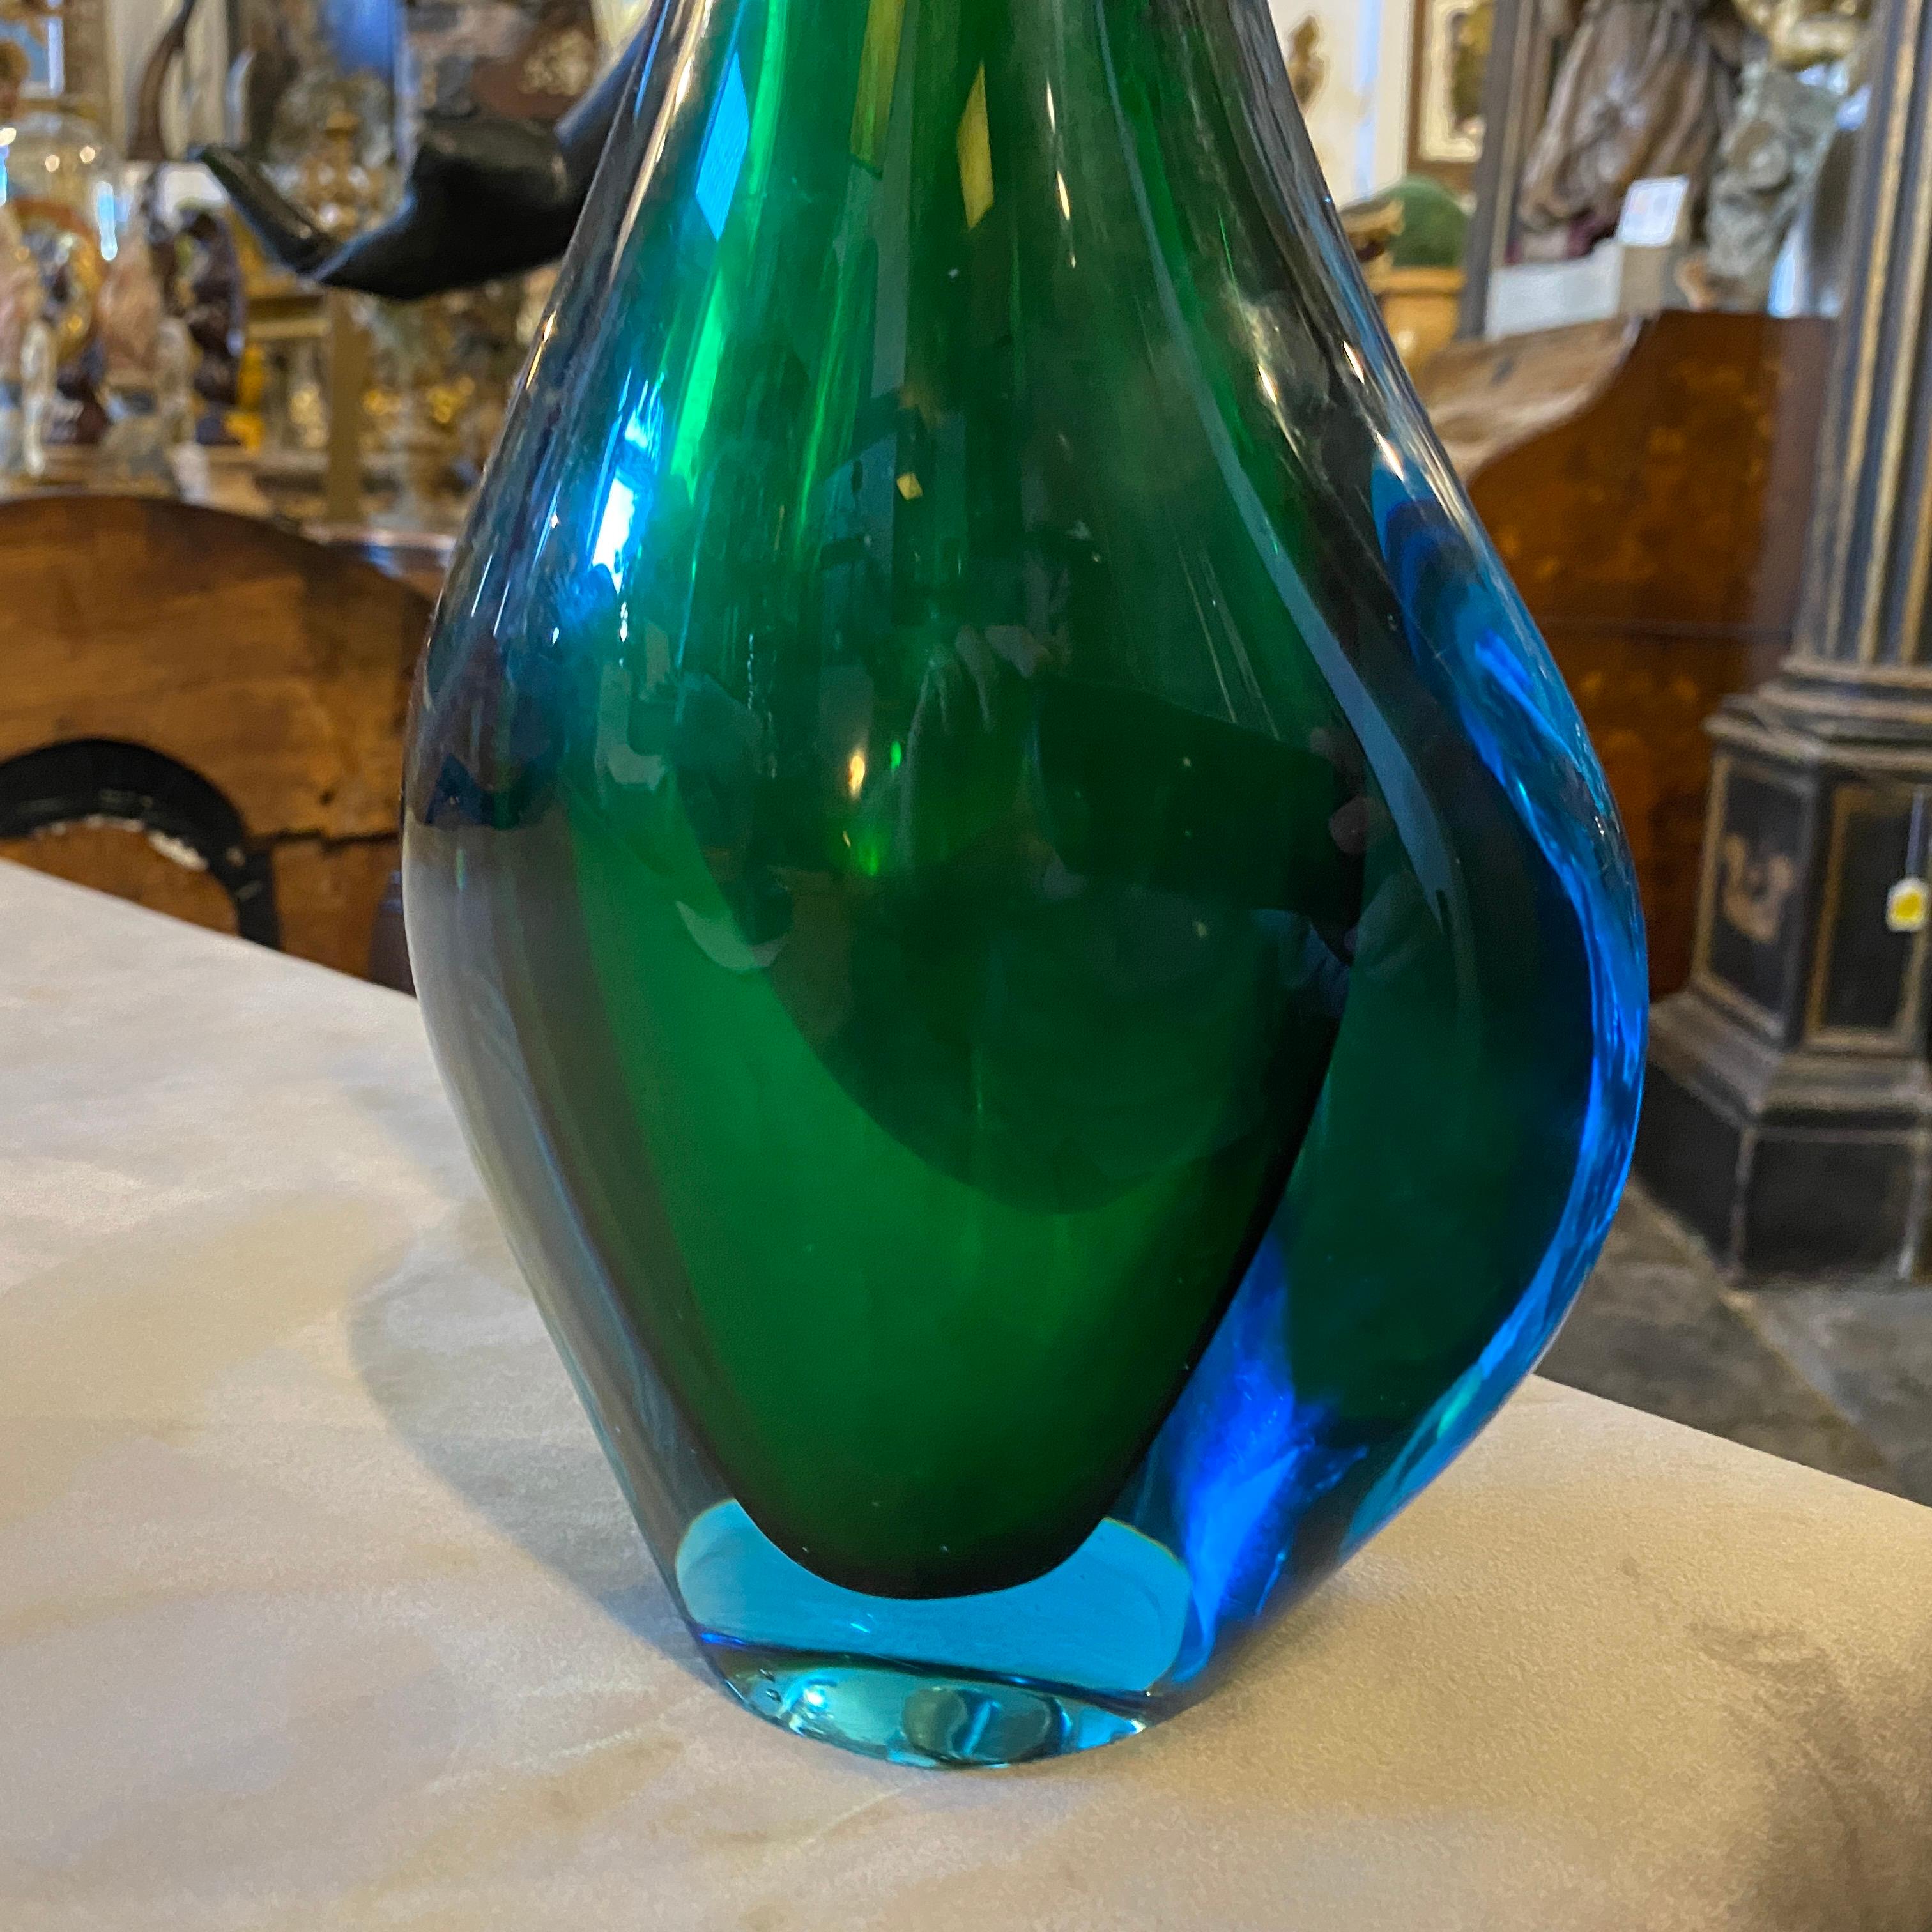 A perfect condition Sommerso Murano glass vase made in the seventies by Flavio Poli for Seguso.